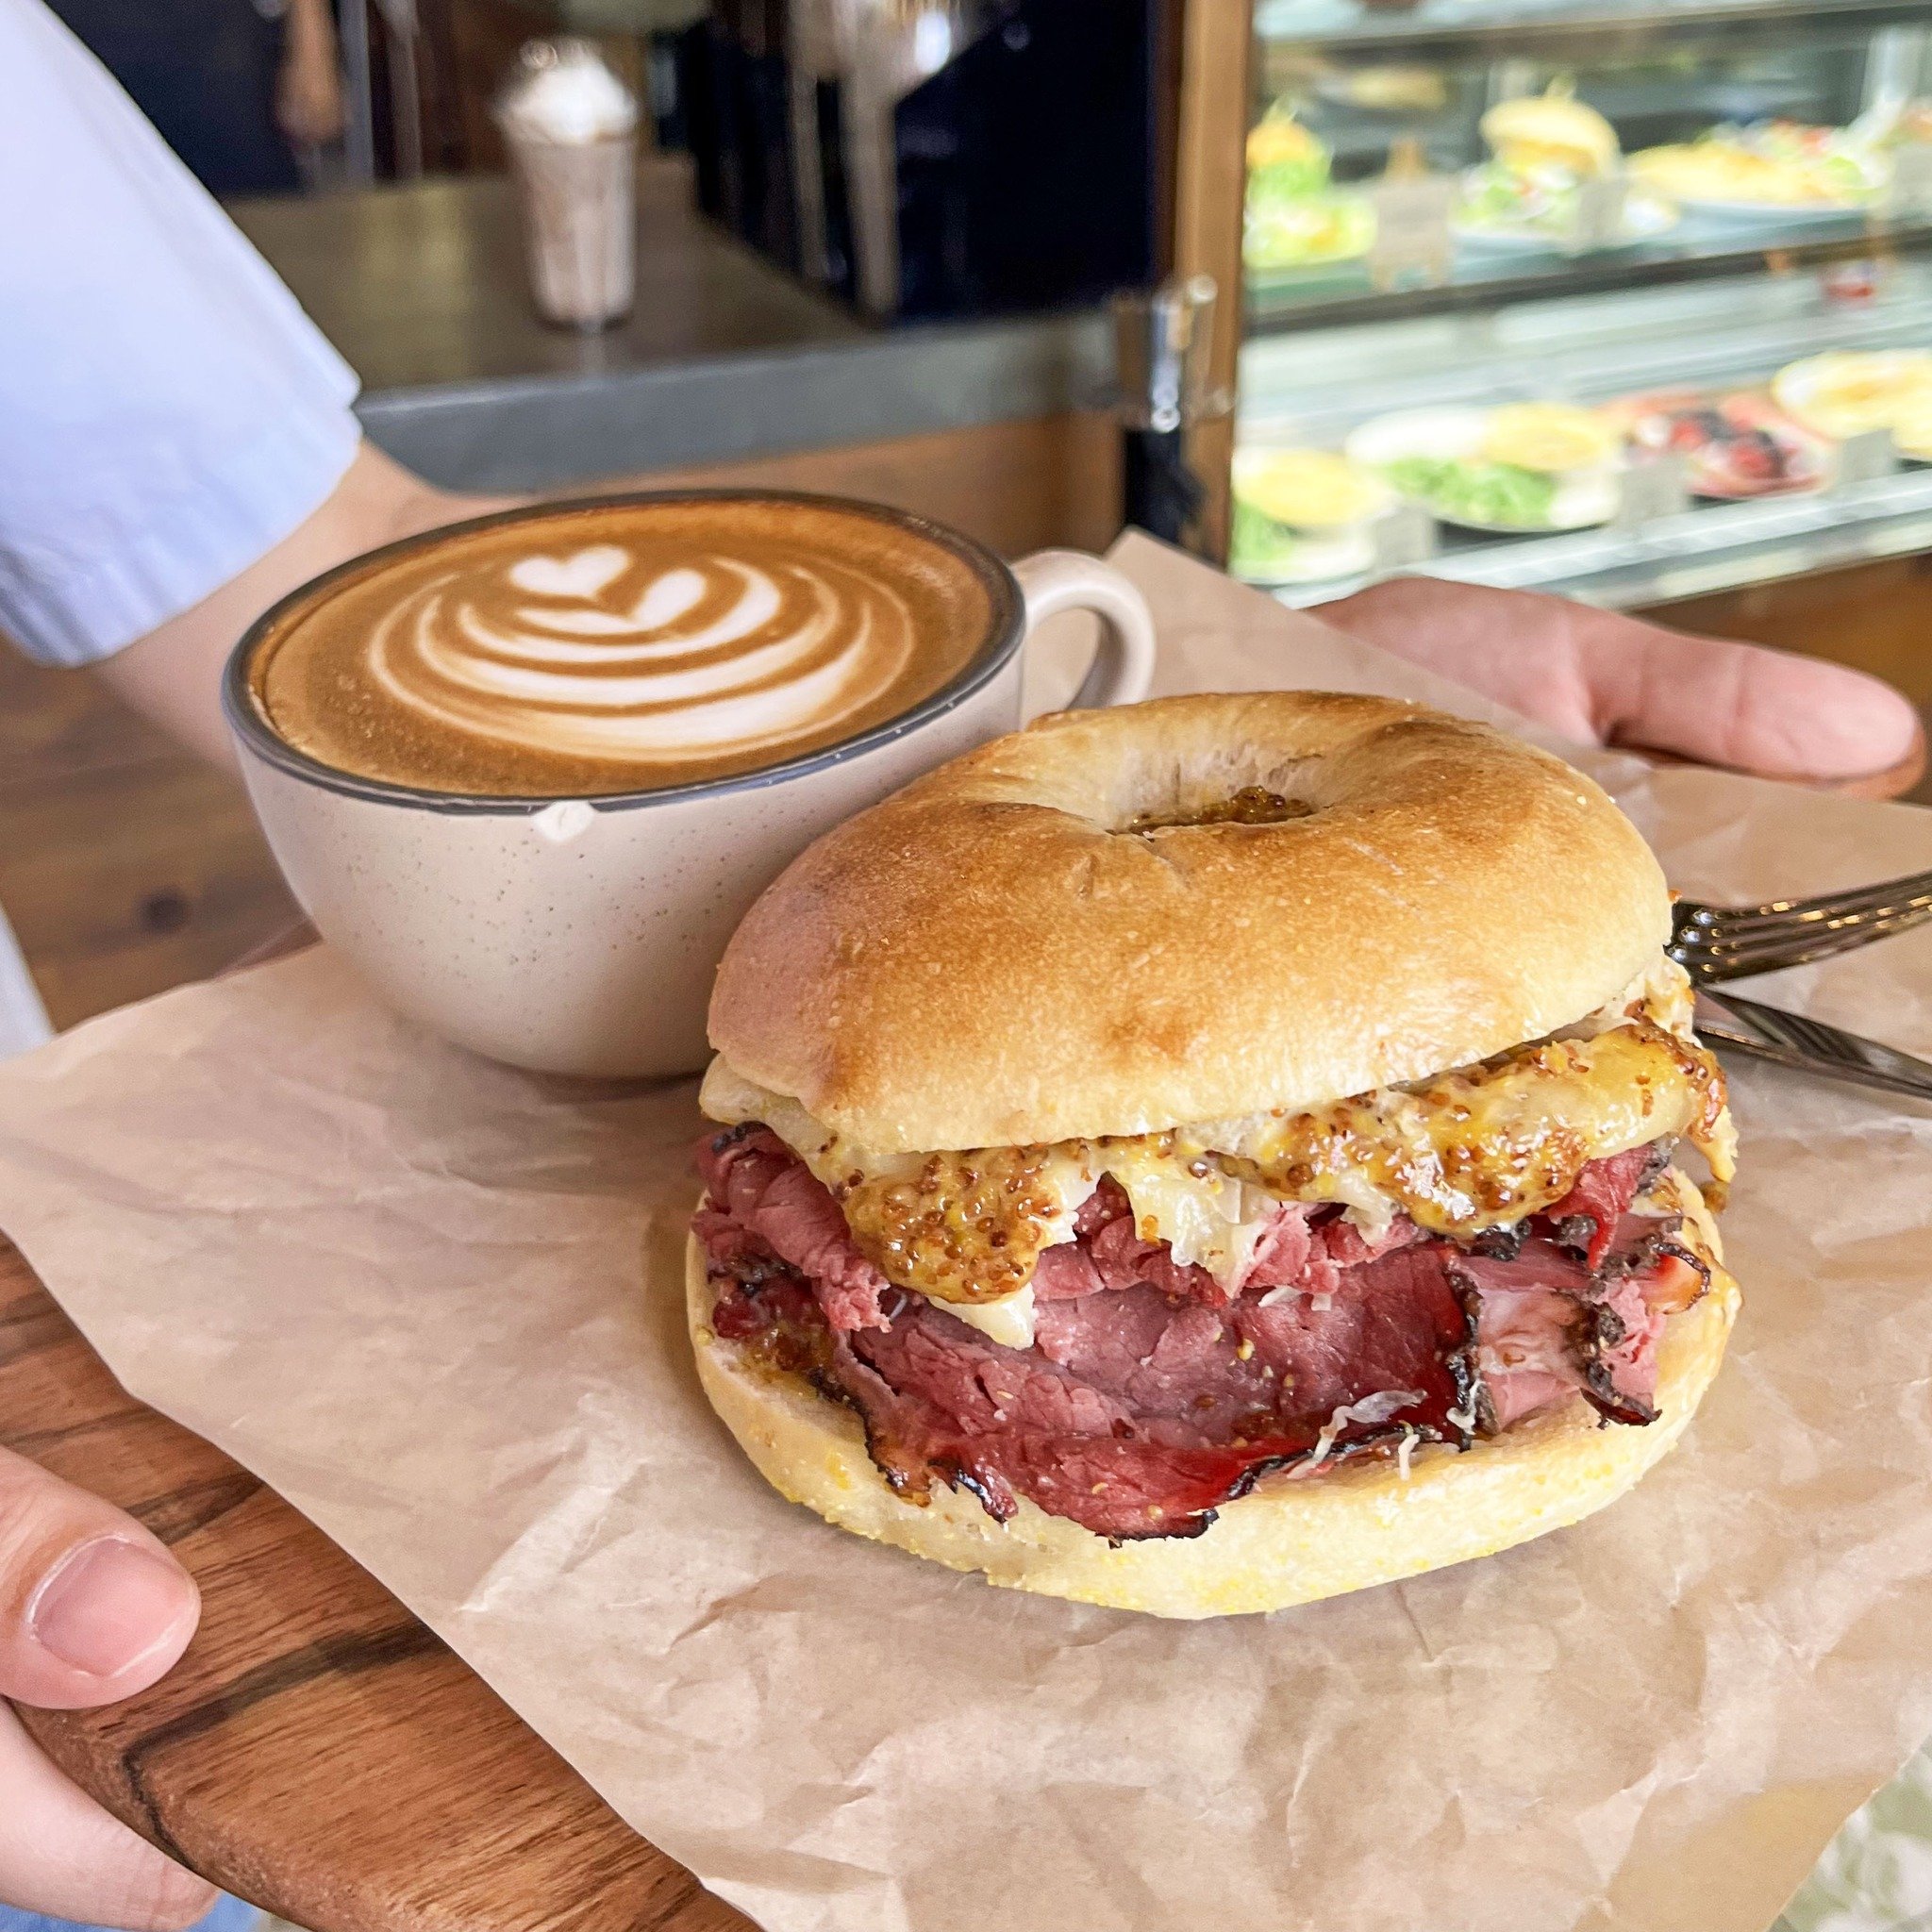 🥯🥪👀Have you heard the news? If you haven't, you are missing out! Our new Reuben Bagel Sandwich is the perfect combination of savory pastrami and spicy horseradish that will tantalize your taste buds with every bite!😌❤️✨

👀✨Looking for a differen